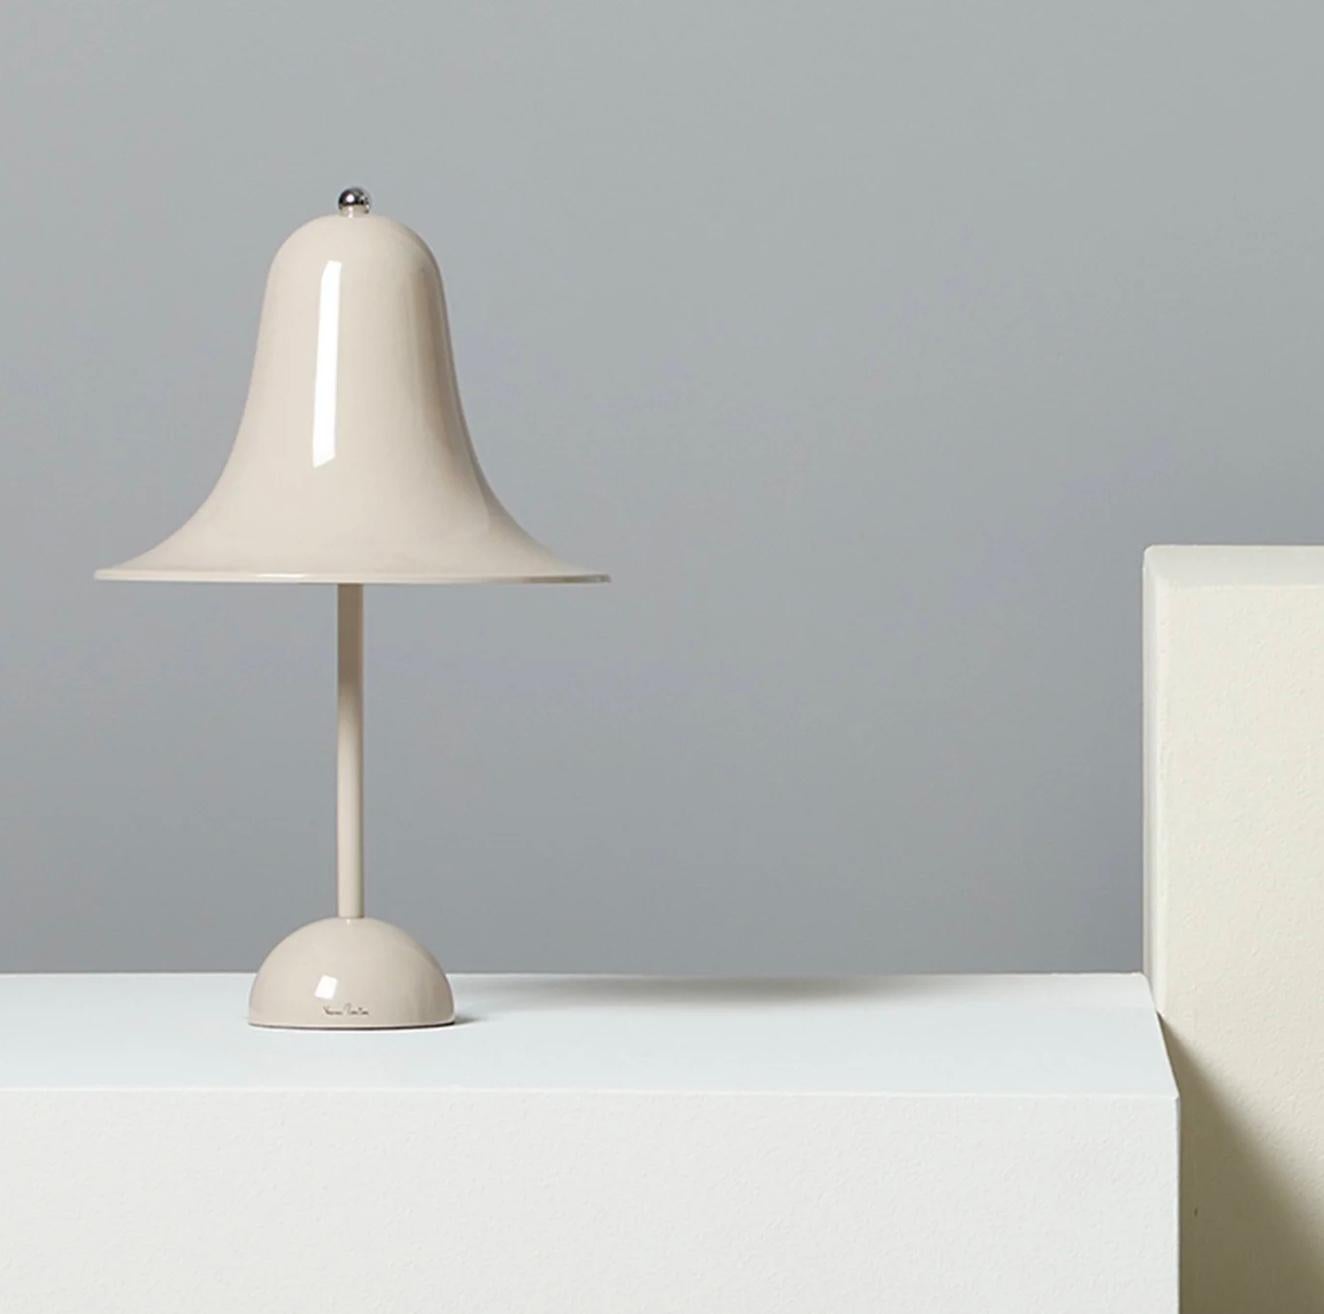 Verner Panton 'Pantop' Table Lamp in 'Light Blue' 1980 for Verpan In New Condition For Sale In Tilburg, NL